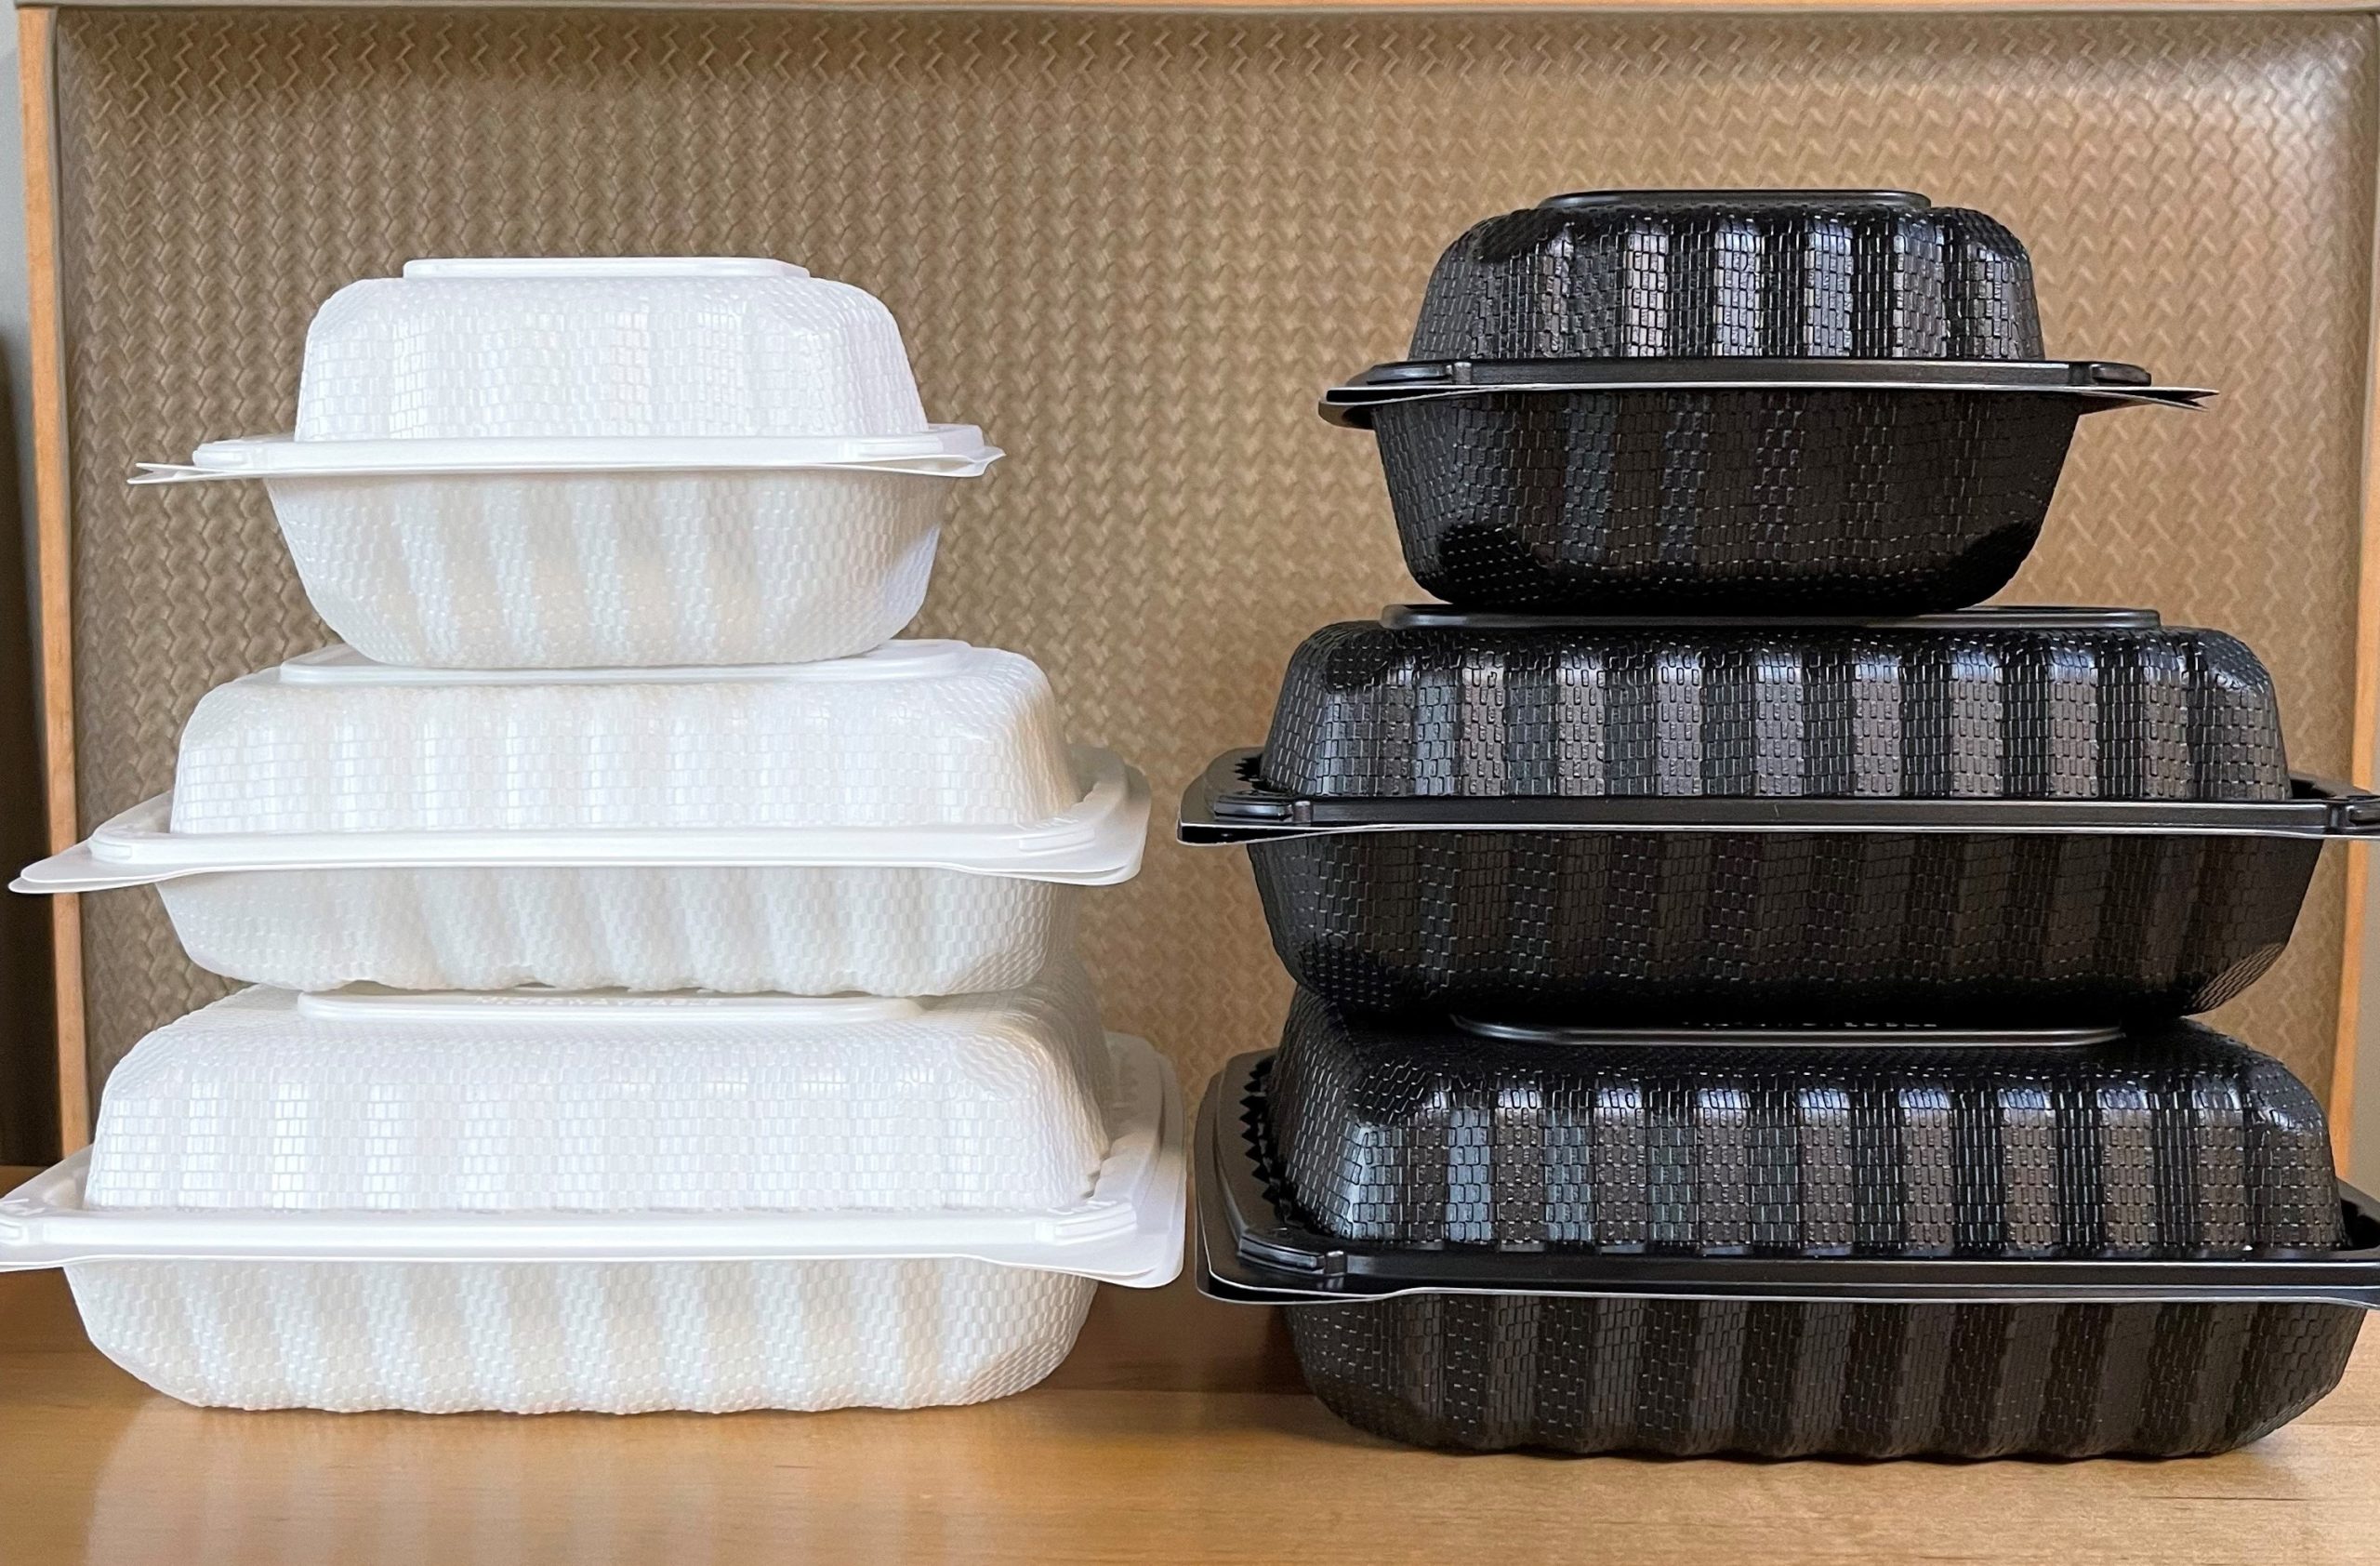 mineral filled polypropylene takeout containers